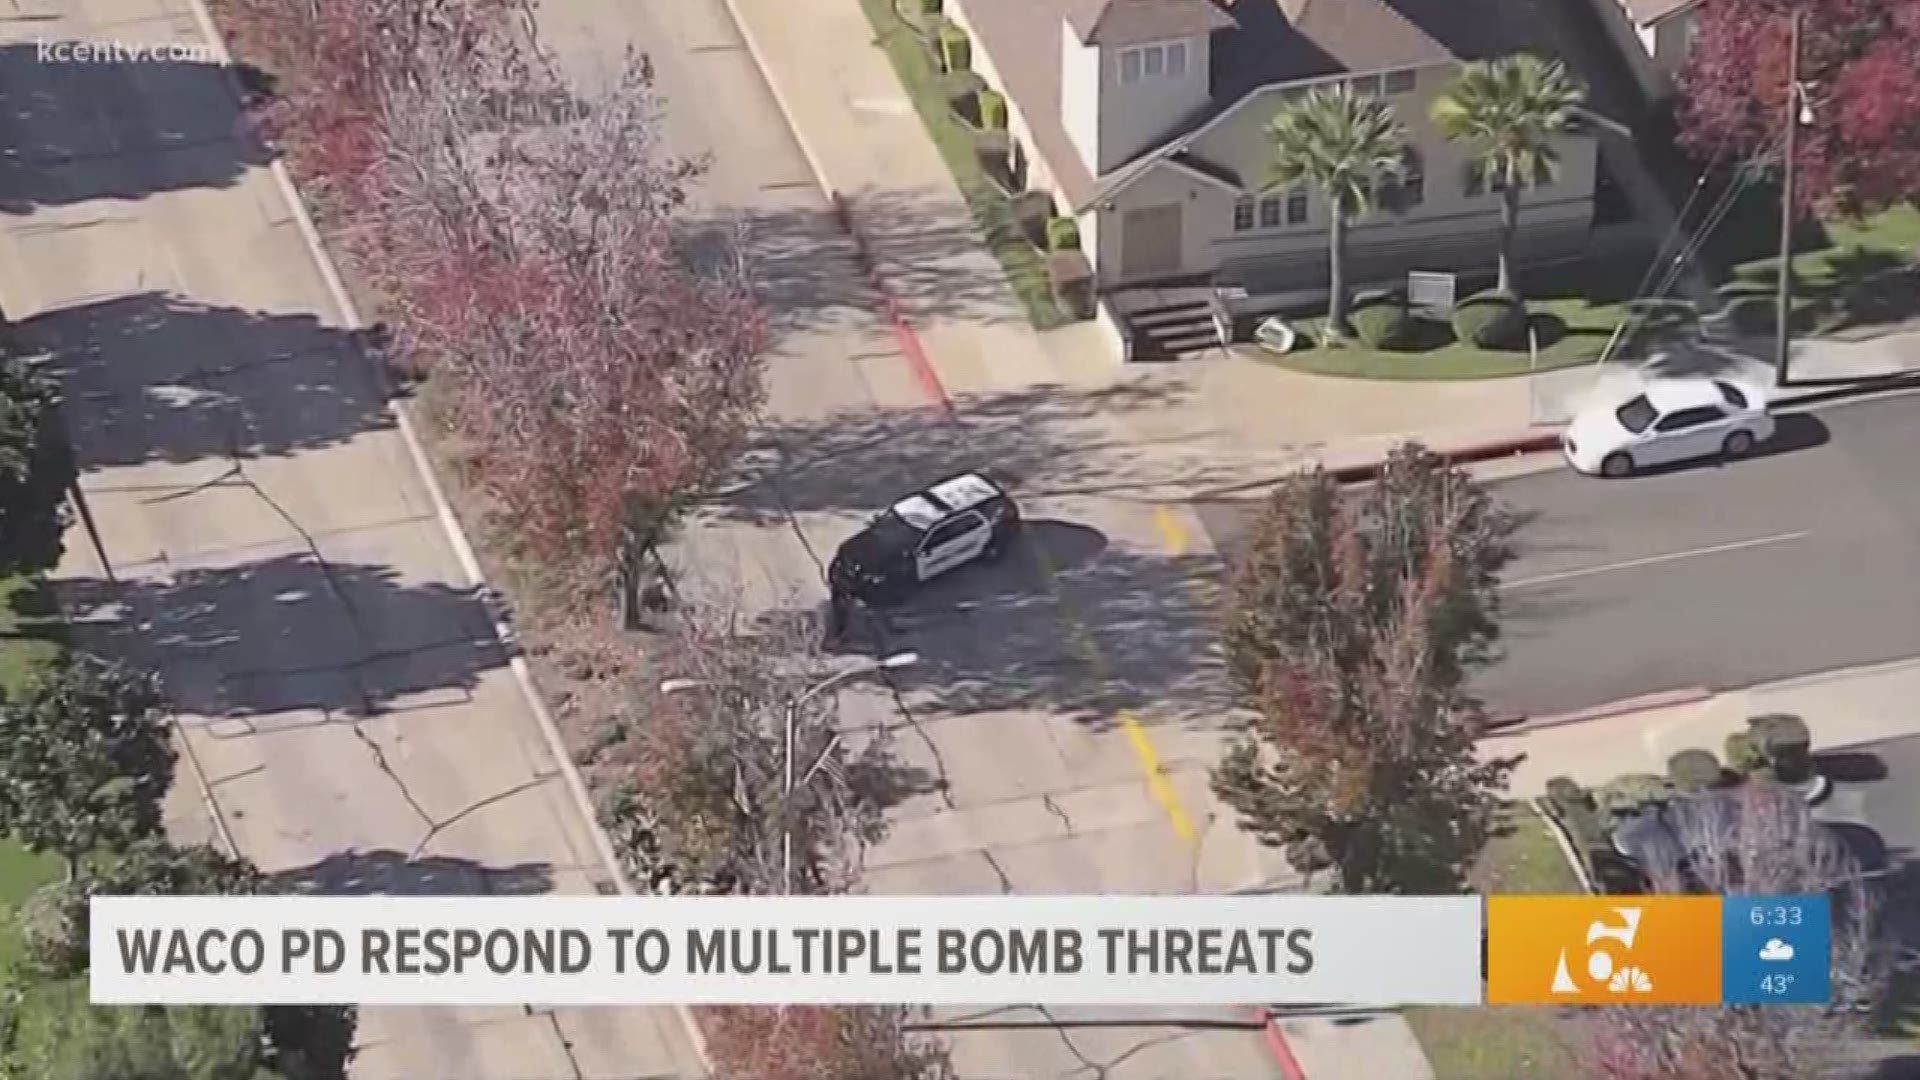 According to police all bomb threats in Central Texas appeared to be false.